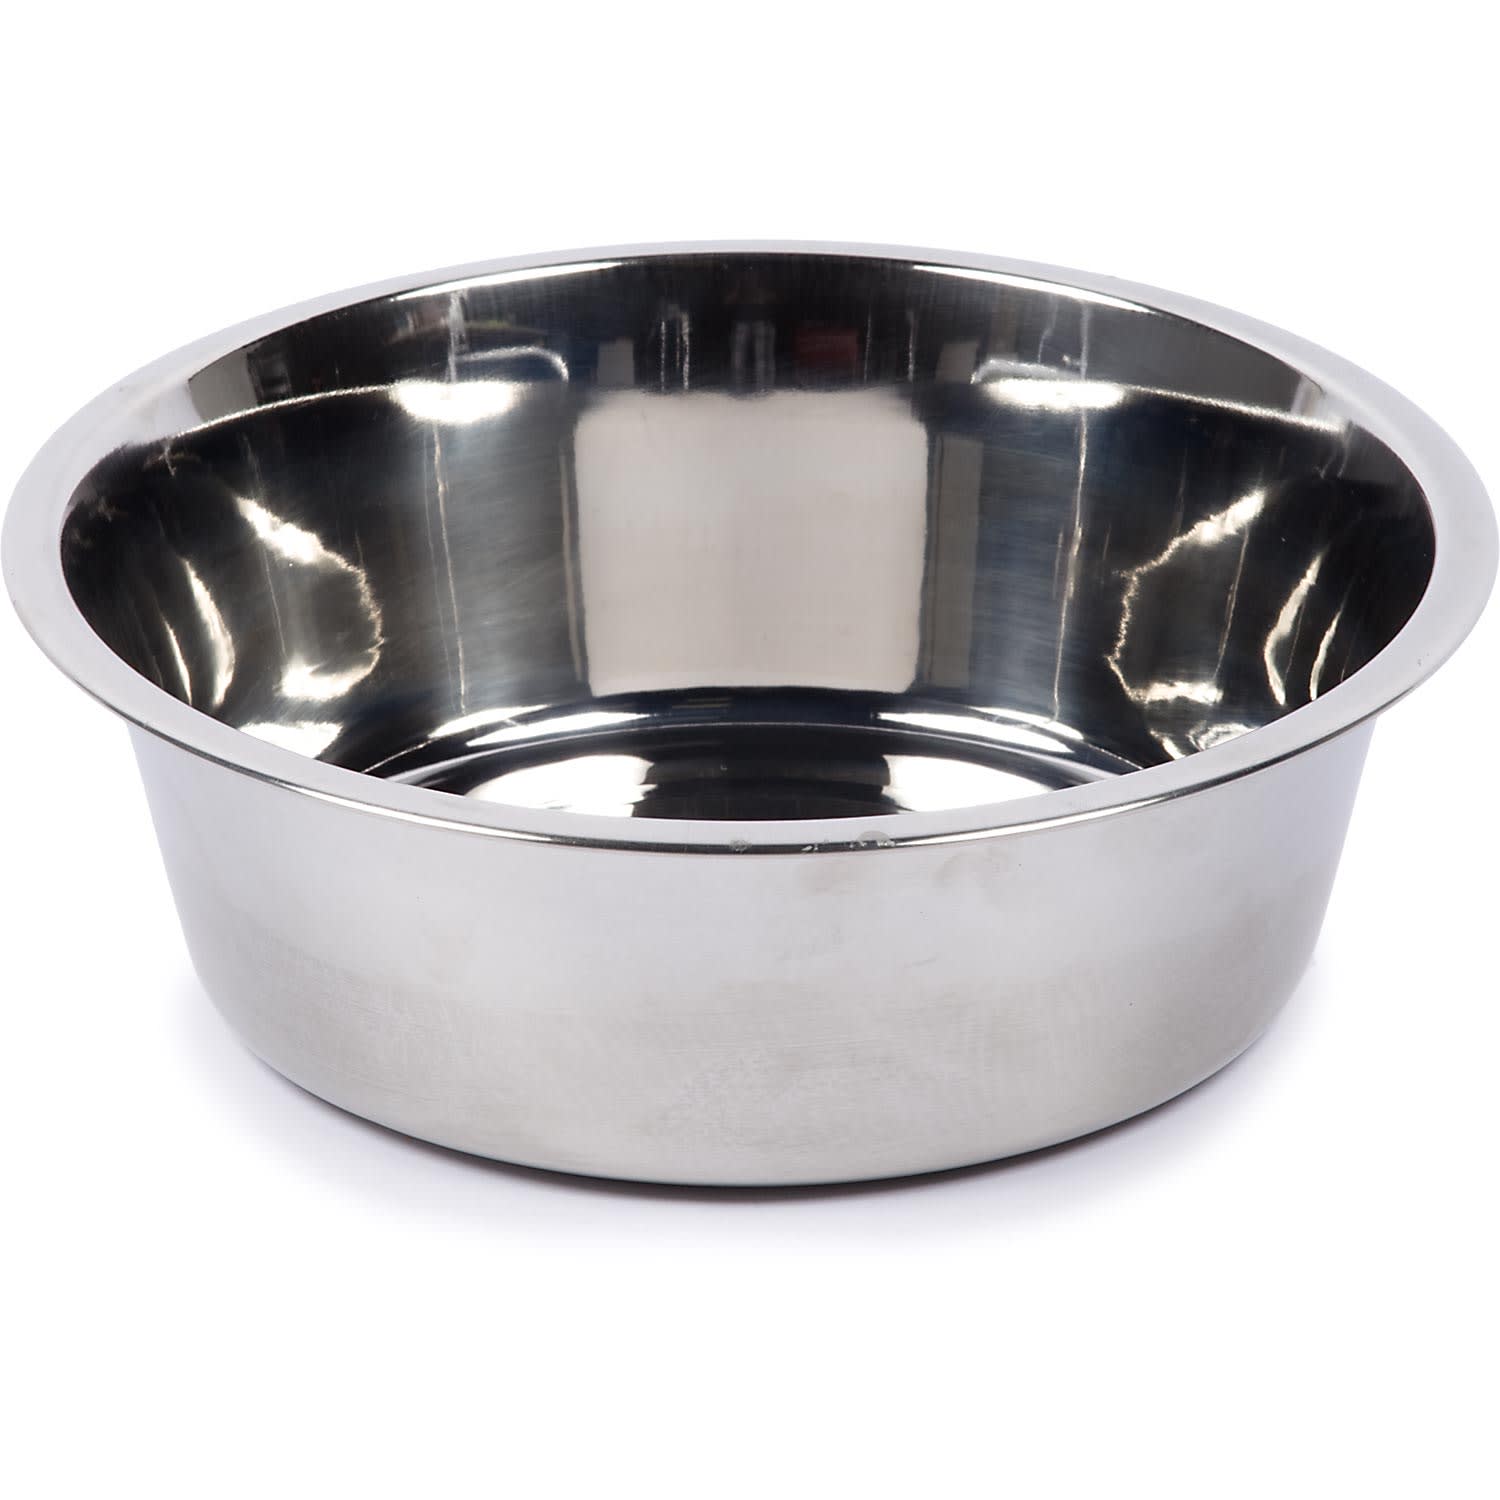 2 Stainless Steel Dog Bowl Set Deep Stainless Steel Anti-Slip Dog Cat Bowls with No-Spill and Non-Skid Rubber Bottom for Small/Medium/Large Dogs/Cats M JJYPET Pet Dog Bowls 